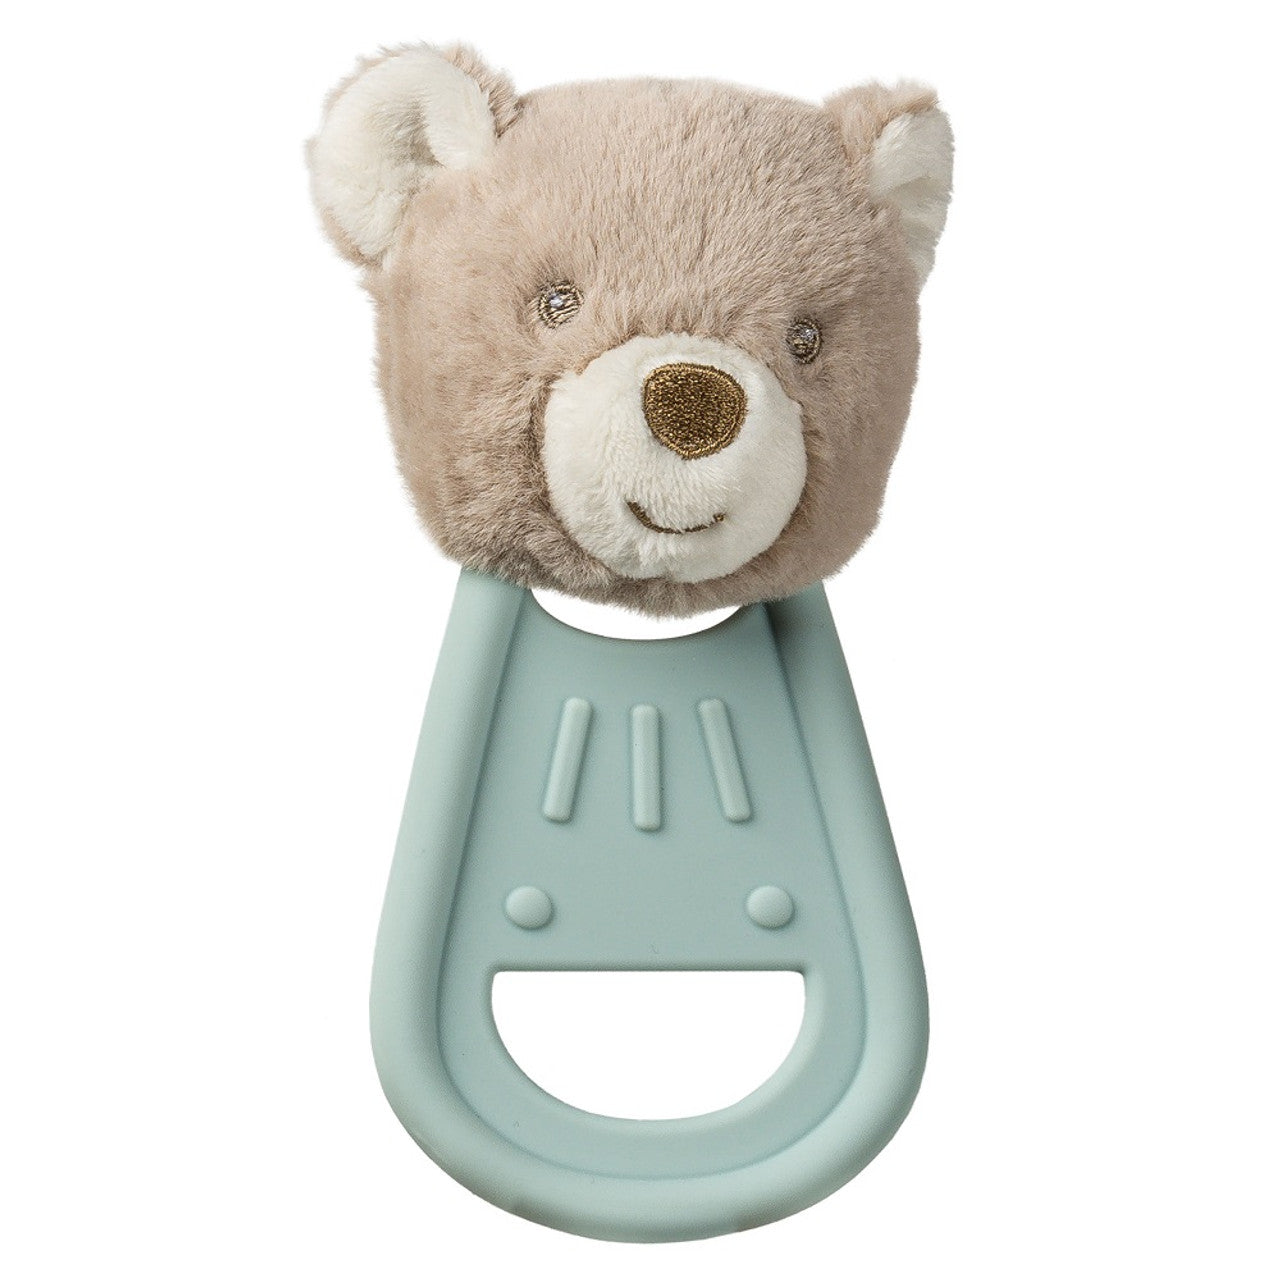 Cream silicone teether with an attached soft toy bear head.